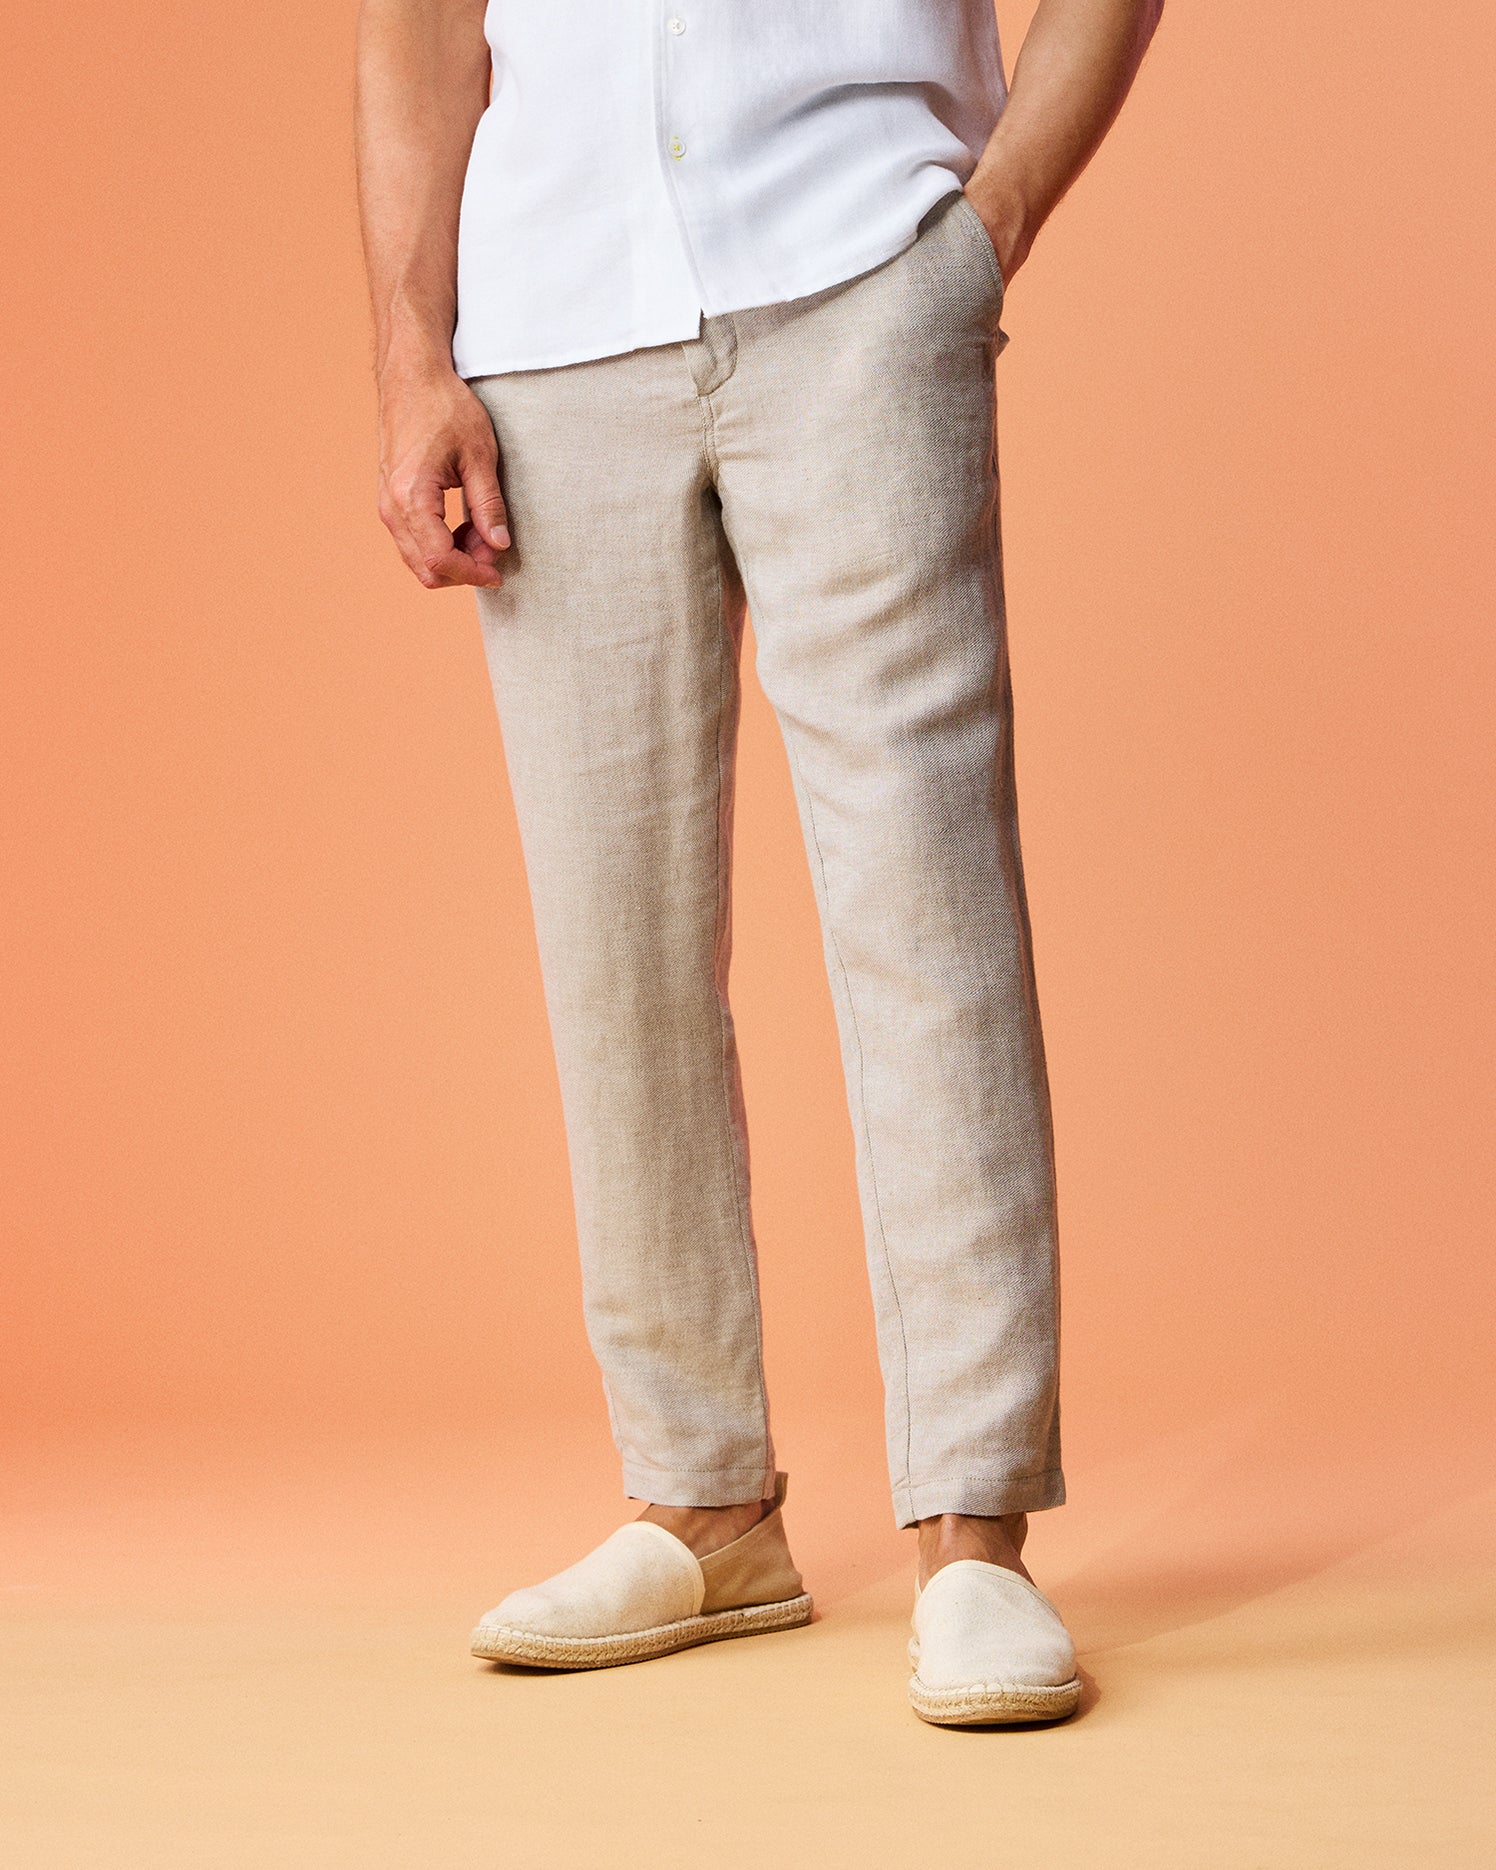 A person wearing the Psycho Bunny MENS FATE LINEN DRAWSTRING PANT - B6P471C200 and white casual shoes stands against a peach background, with a hand casually placed in the pocket. Only the lower torso and legs are visible.